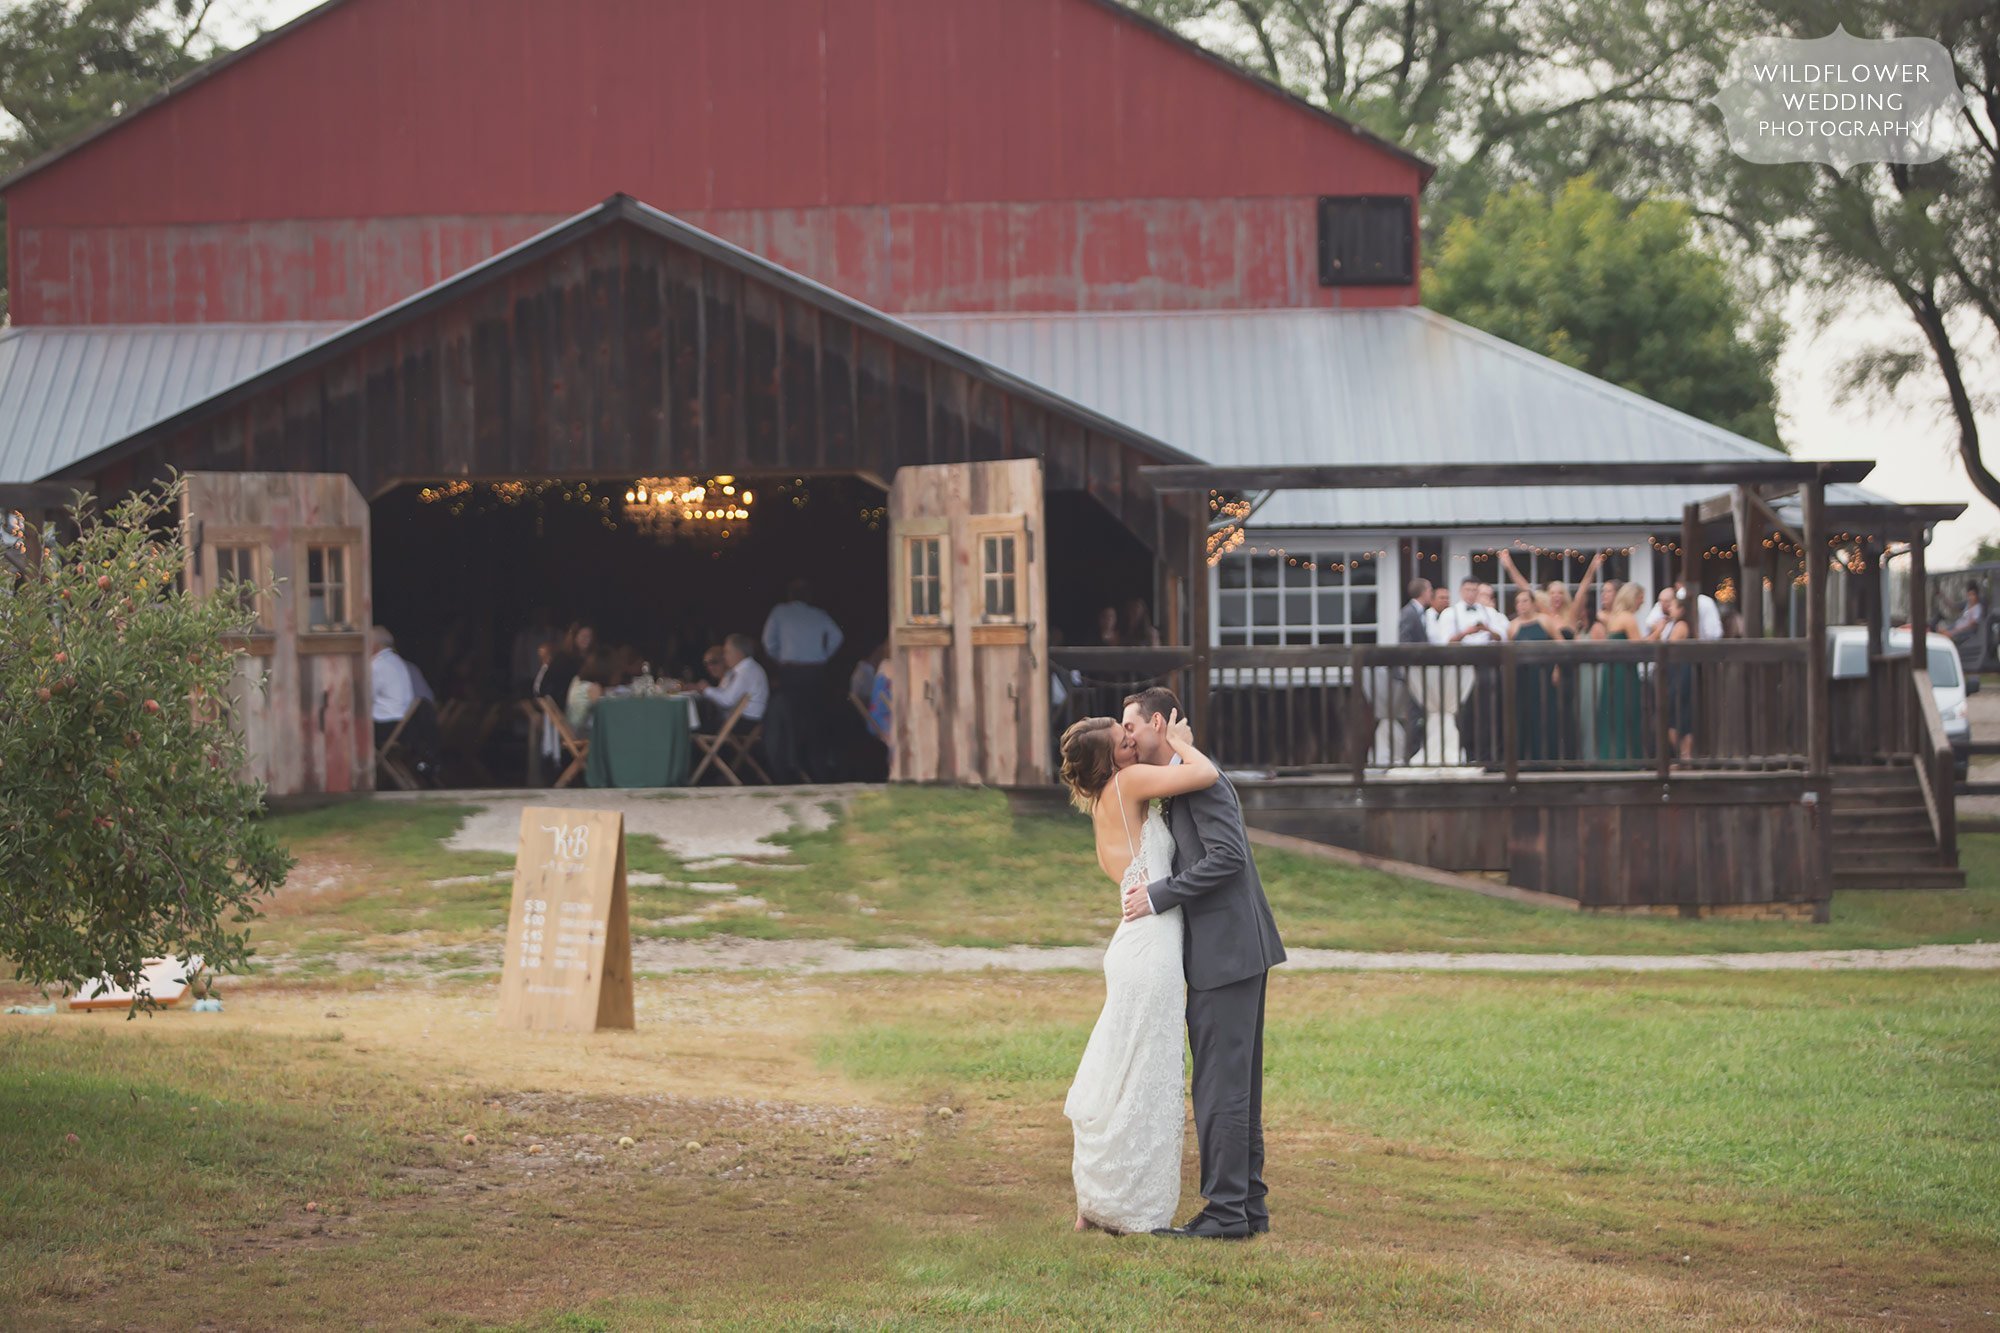 The bride and groom kiss in front of the old barn at the Weston Red Barn Farm in MO.